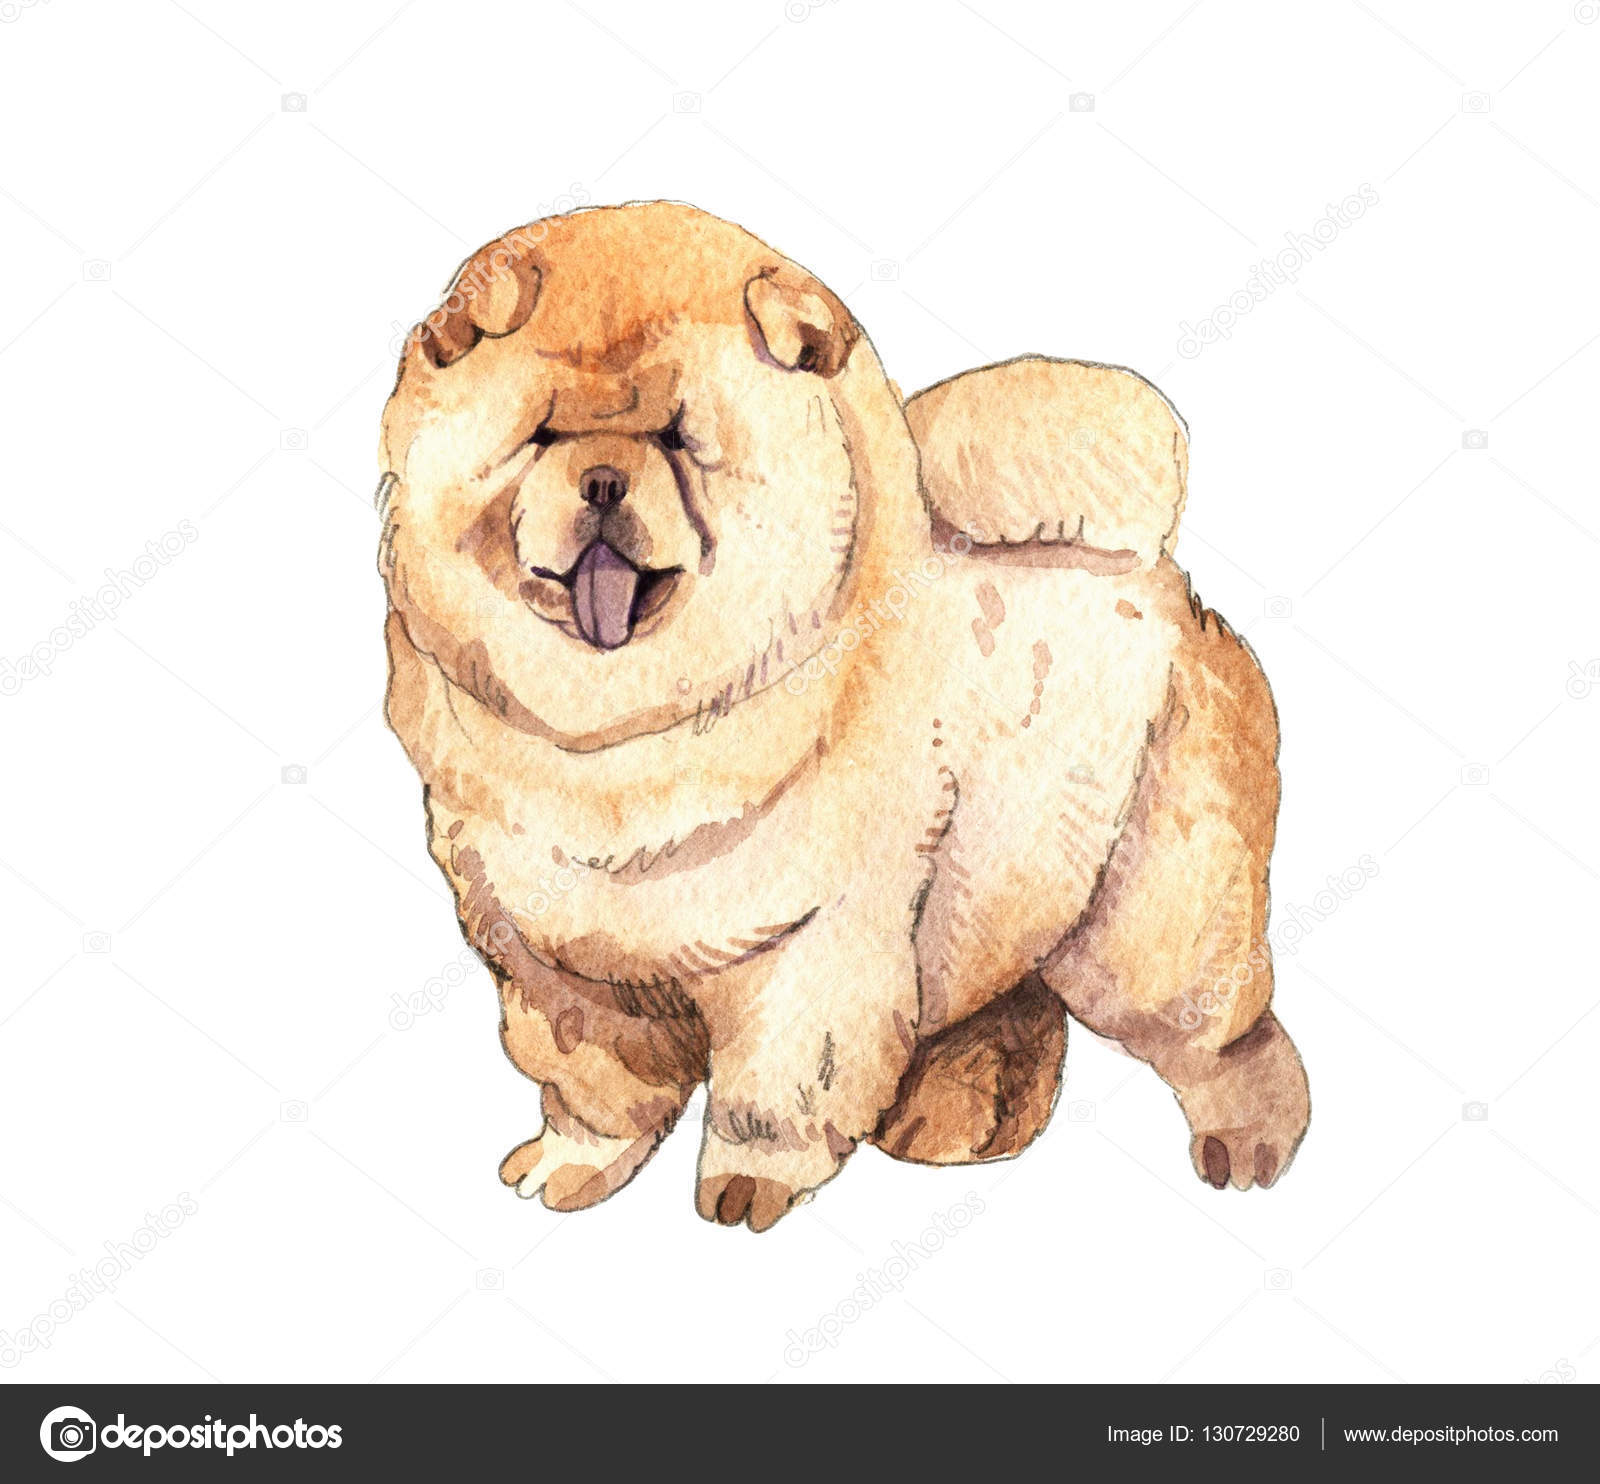 Watercolr Illustration Of Chow Chow Dog Isolated On White Background Funny Dog Showing Tongue Greeting Card Design Stock Photo By C Shat